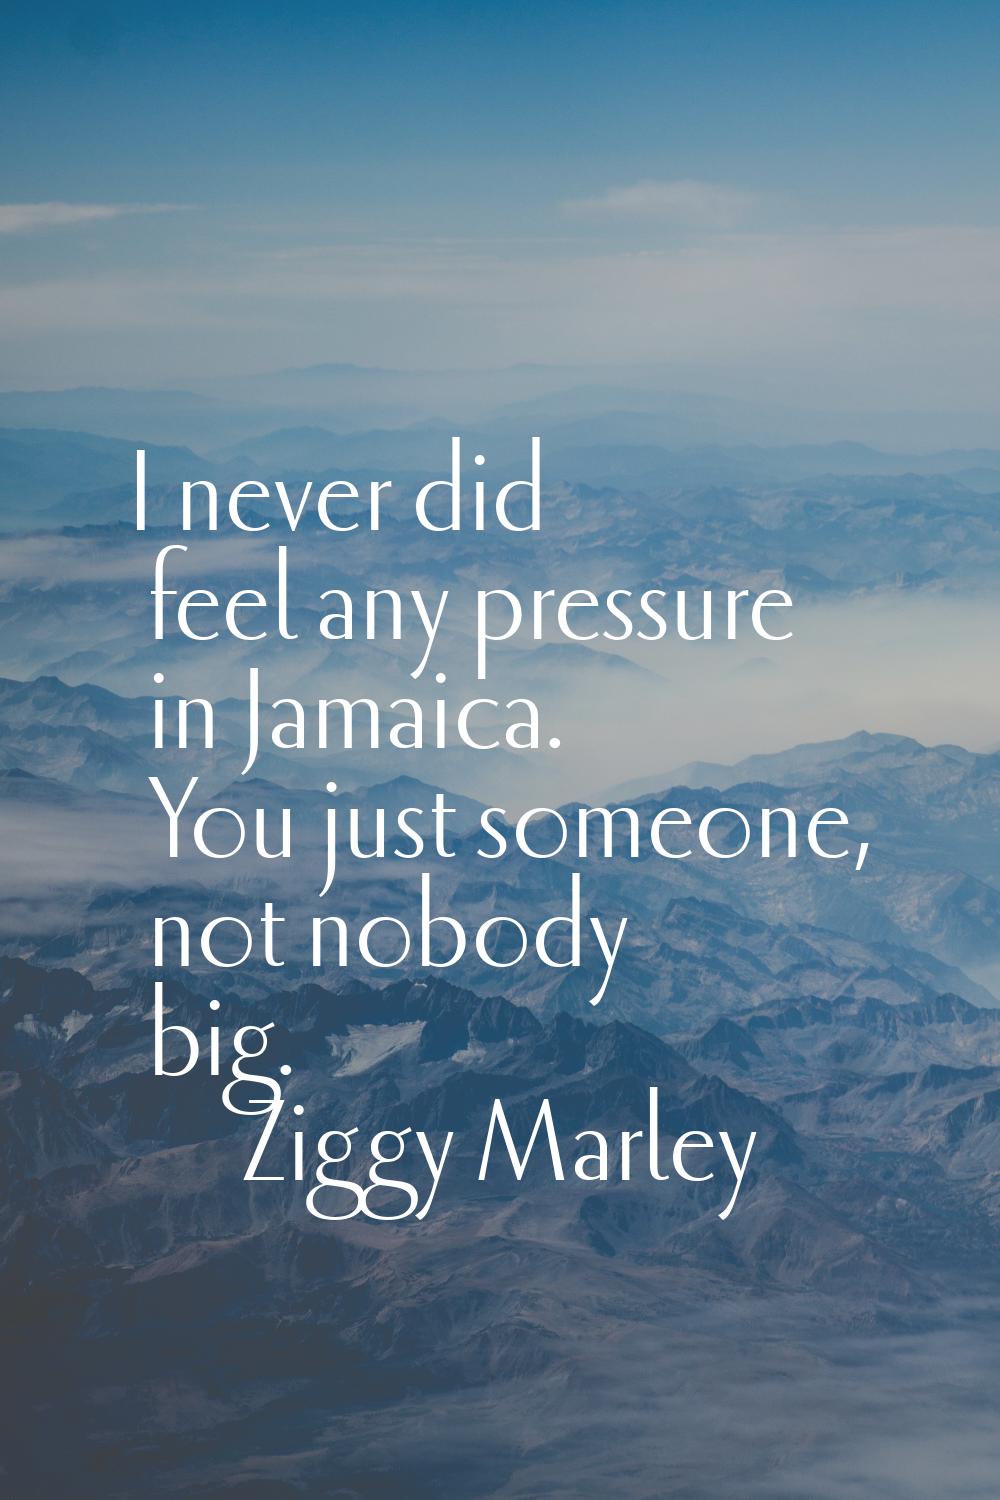 I never did feel any pressure in Jamaica. You just someone, not nobody big.